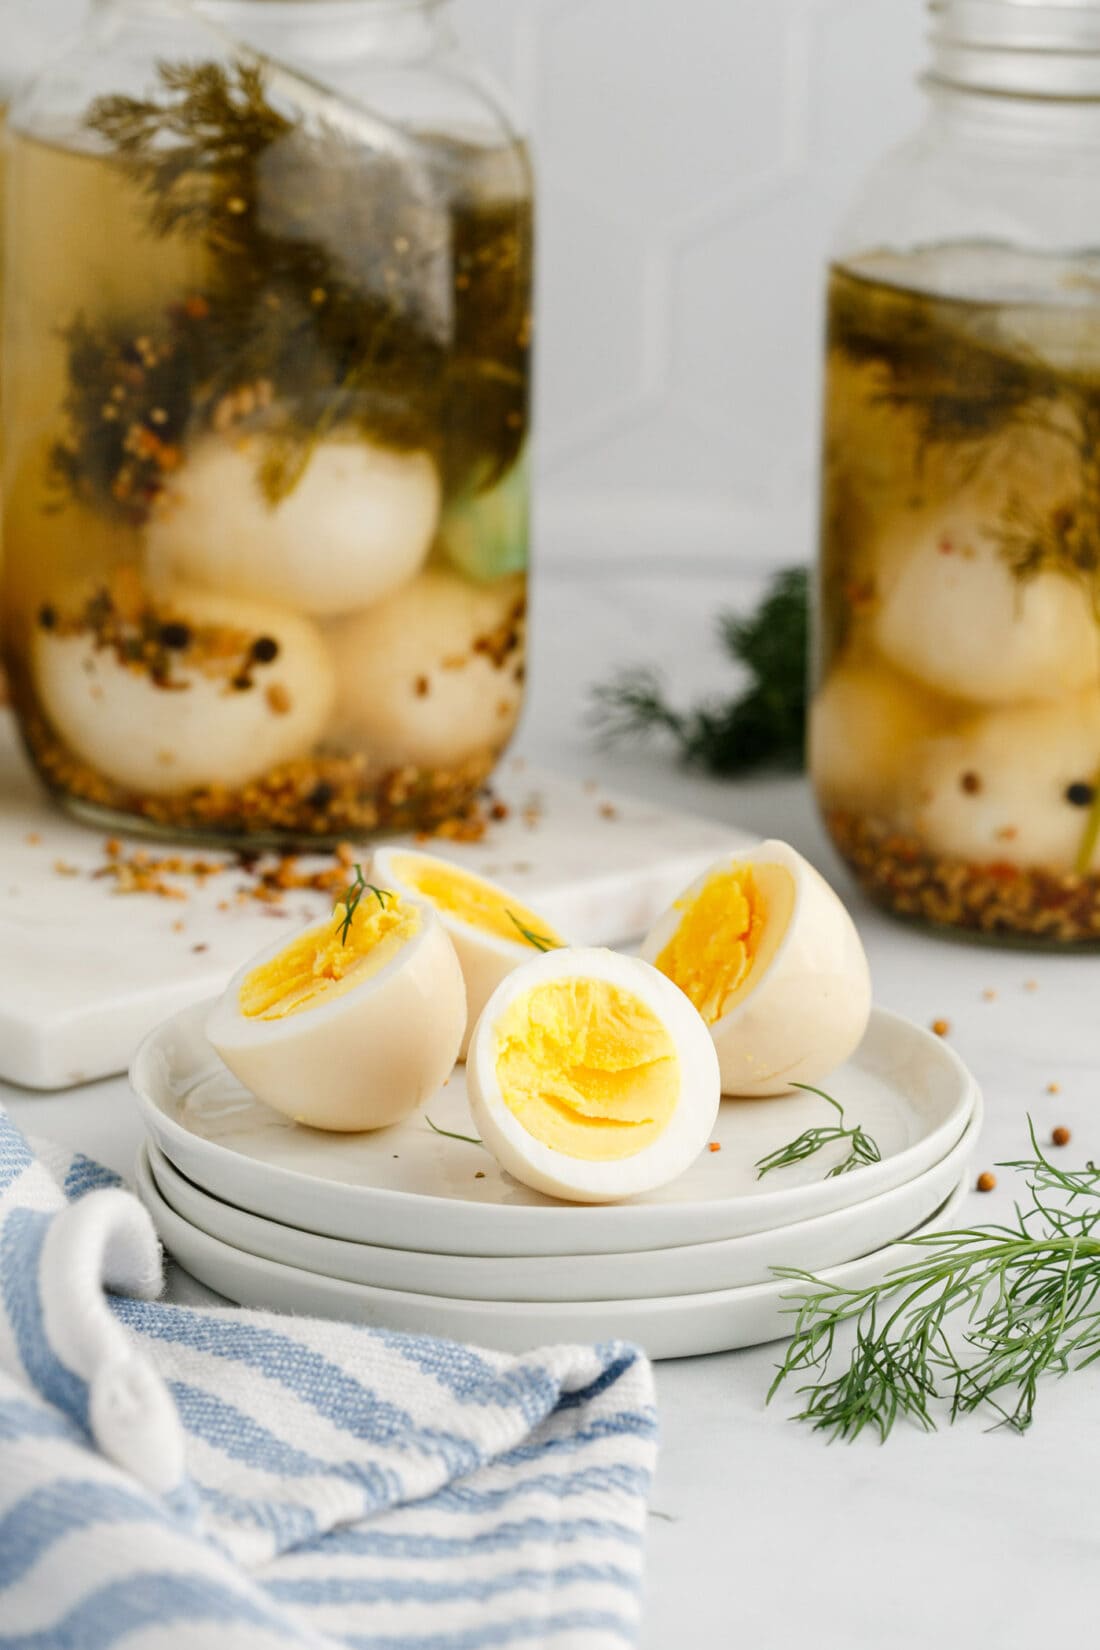 Two Pickled Eggs cut in half on a plate with jars of Pickled Eggs in the background